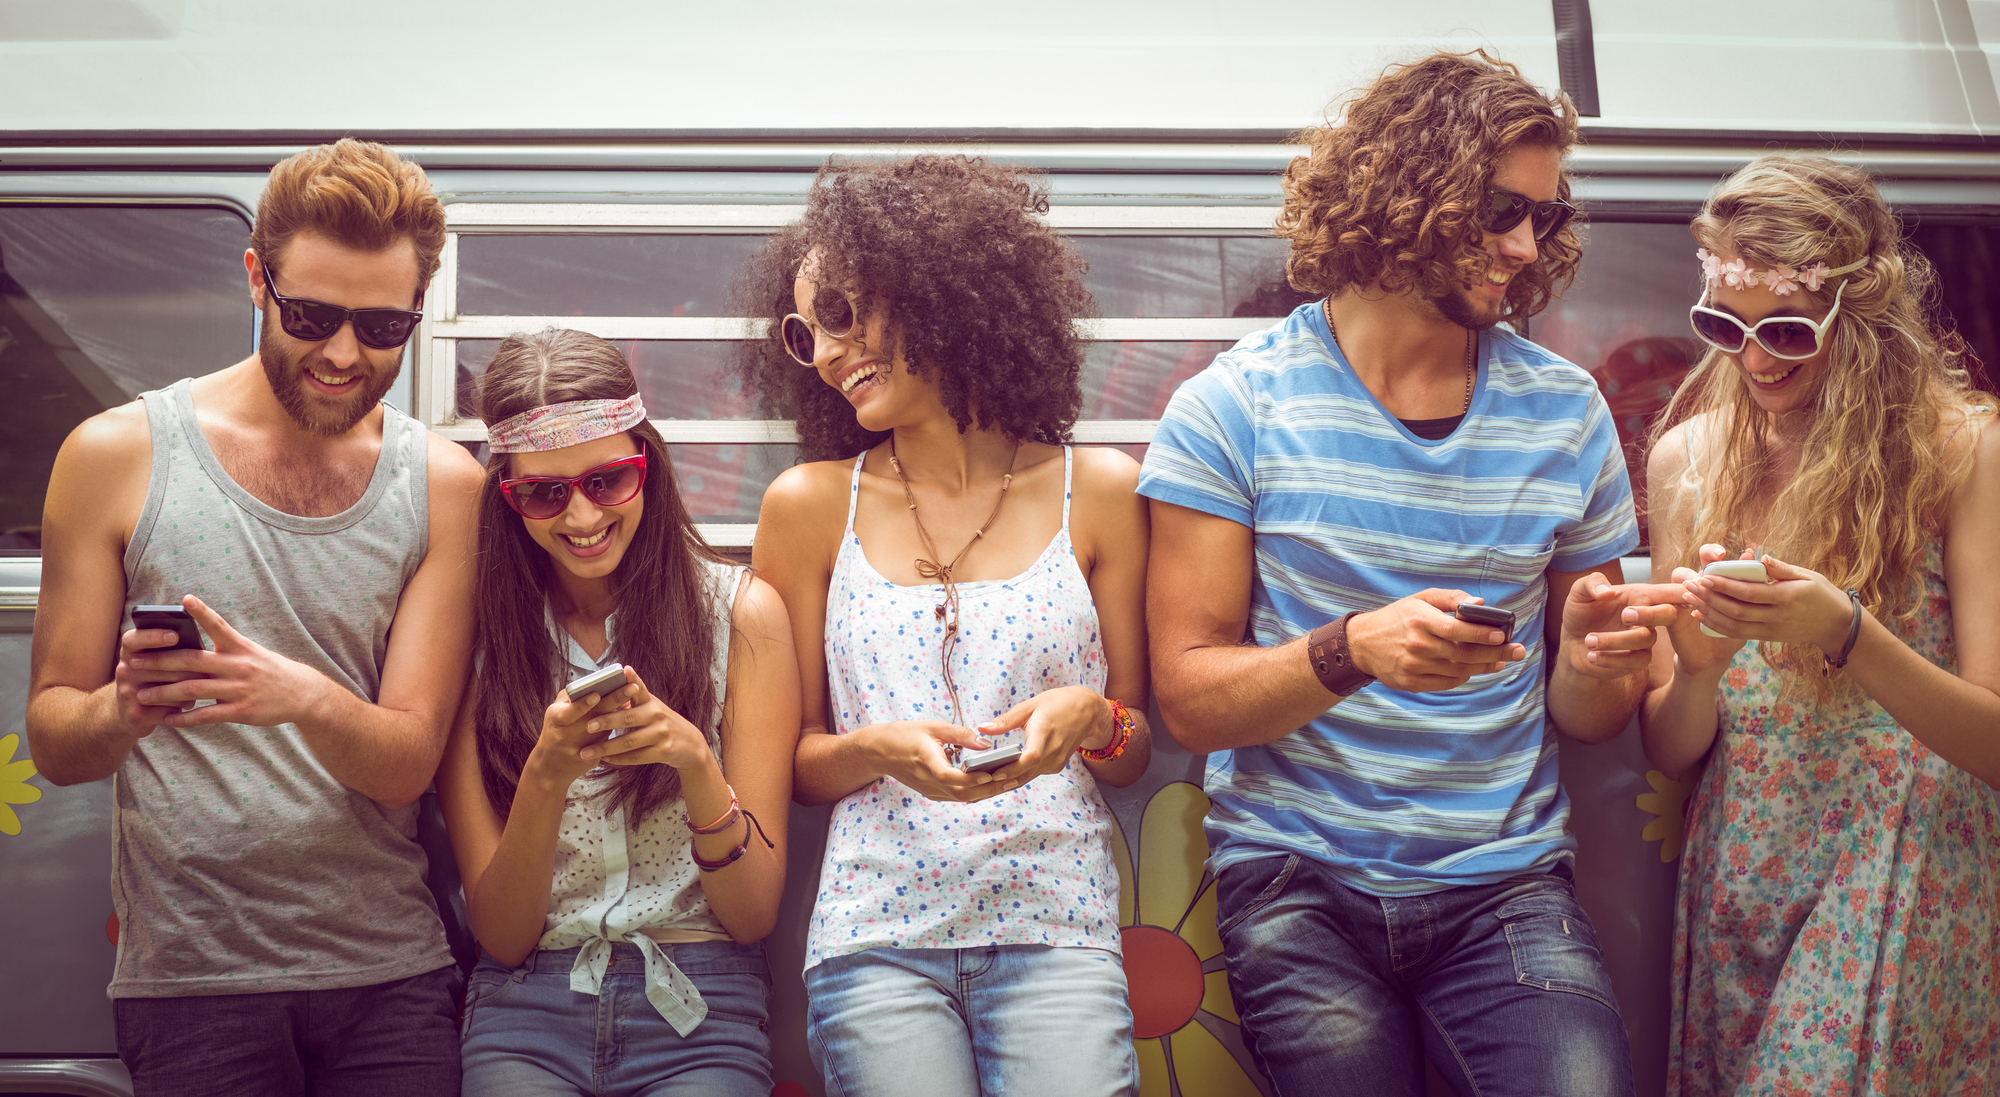 five young friends in summer attire leaning on the side of a van, smiling and looking at their smartphones